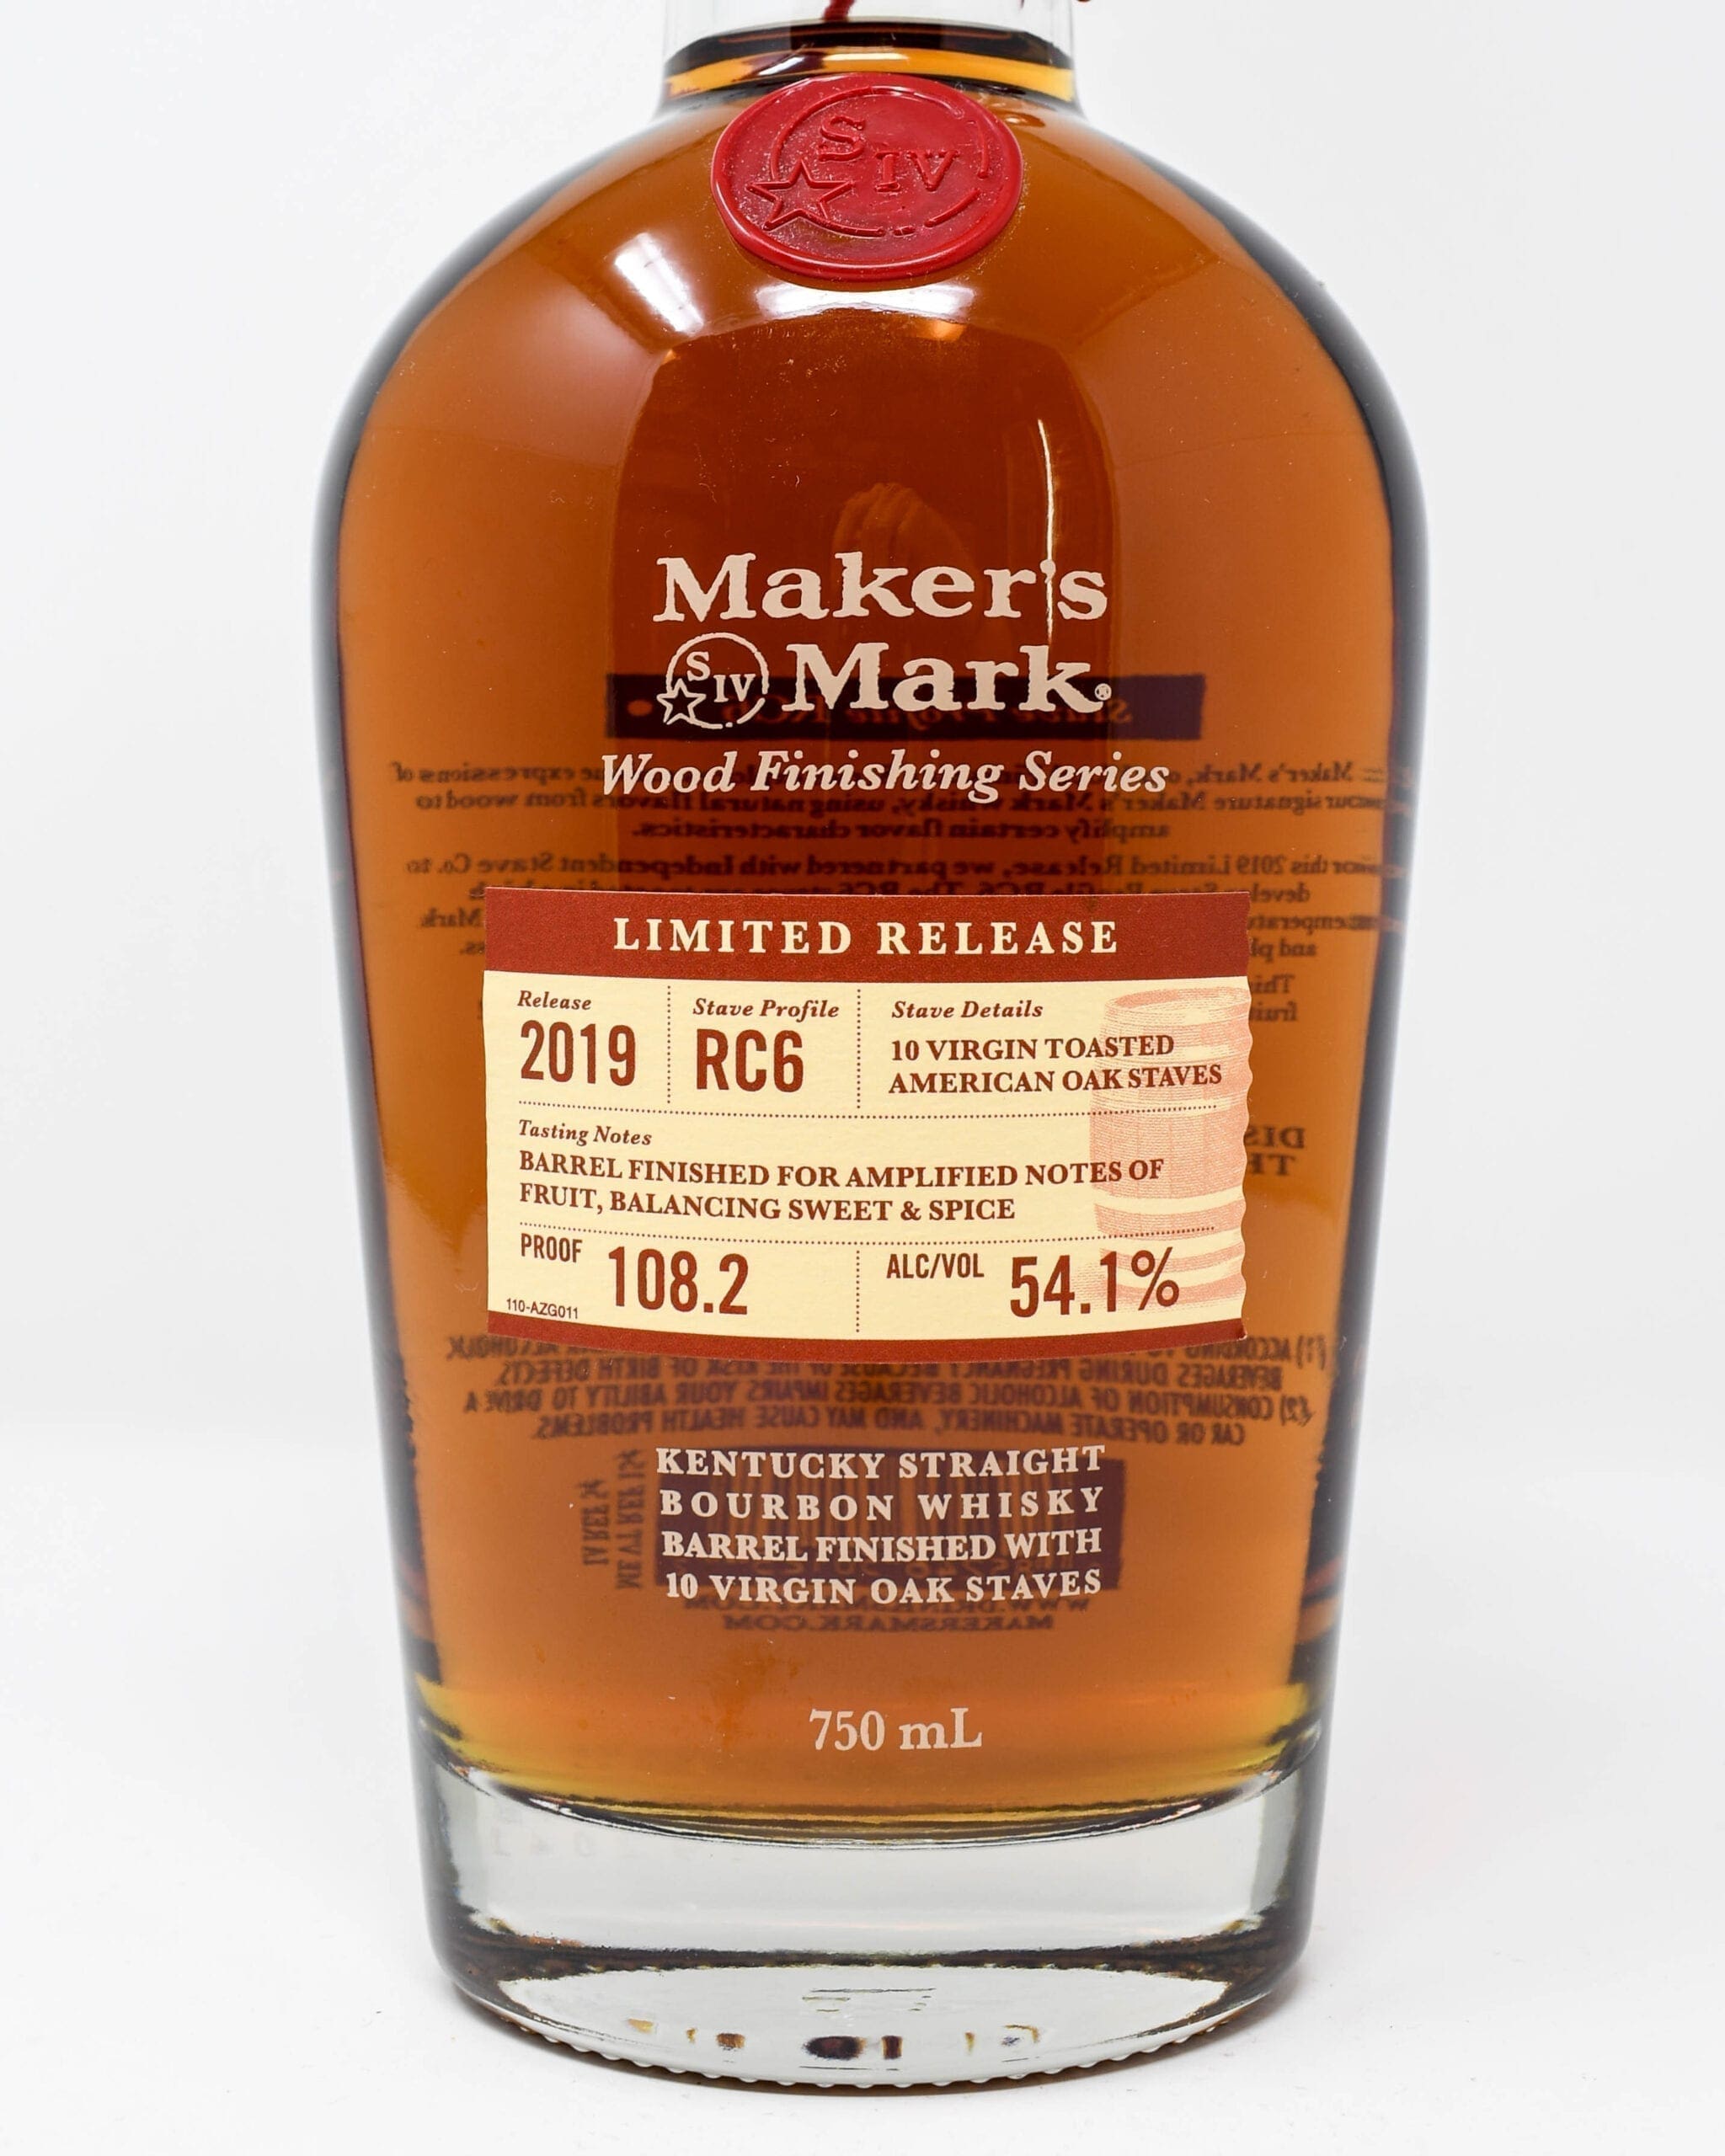 Makers Mark, Wood Finishing Series, 2019 Limited Release Bourbon